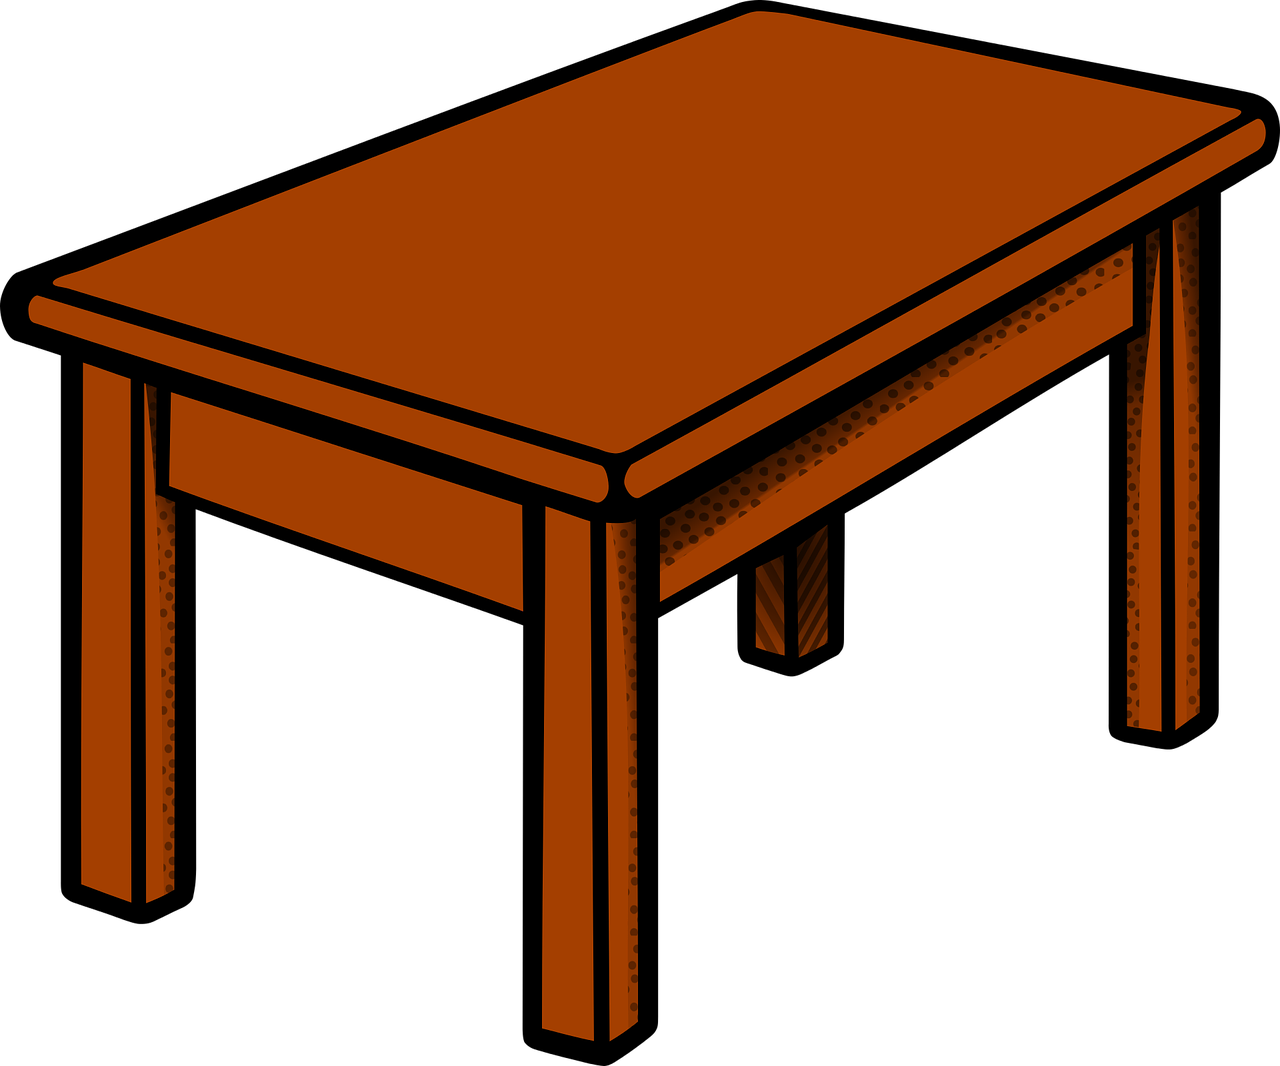 A Brown Rectangular Table With Legs